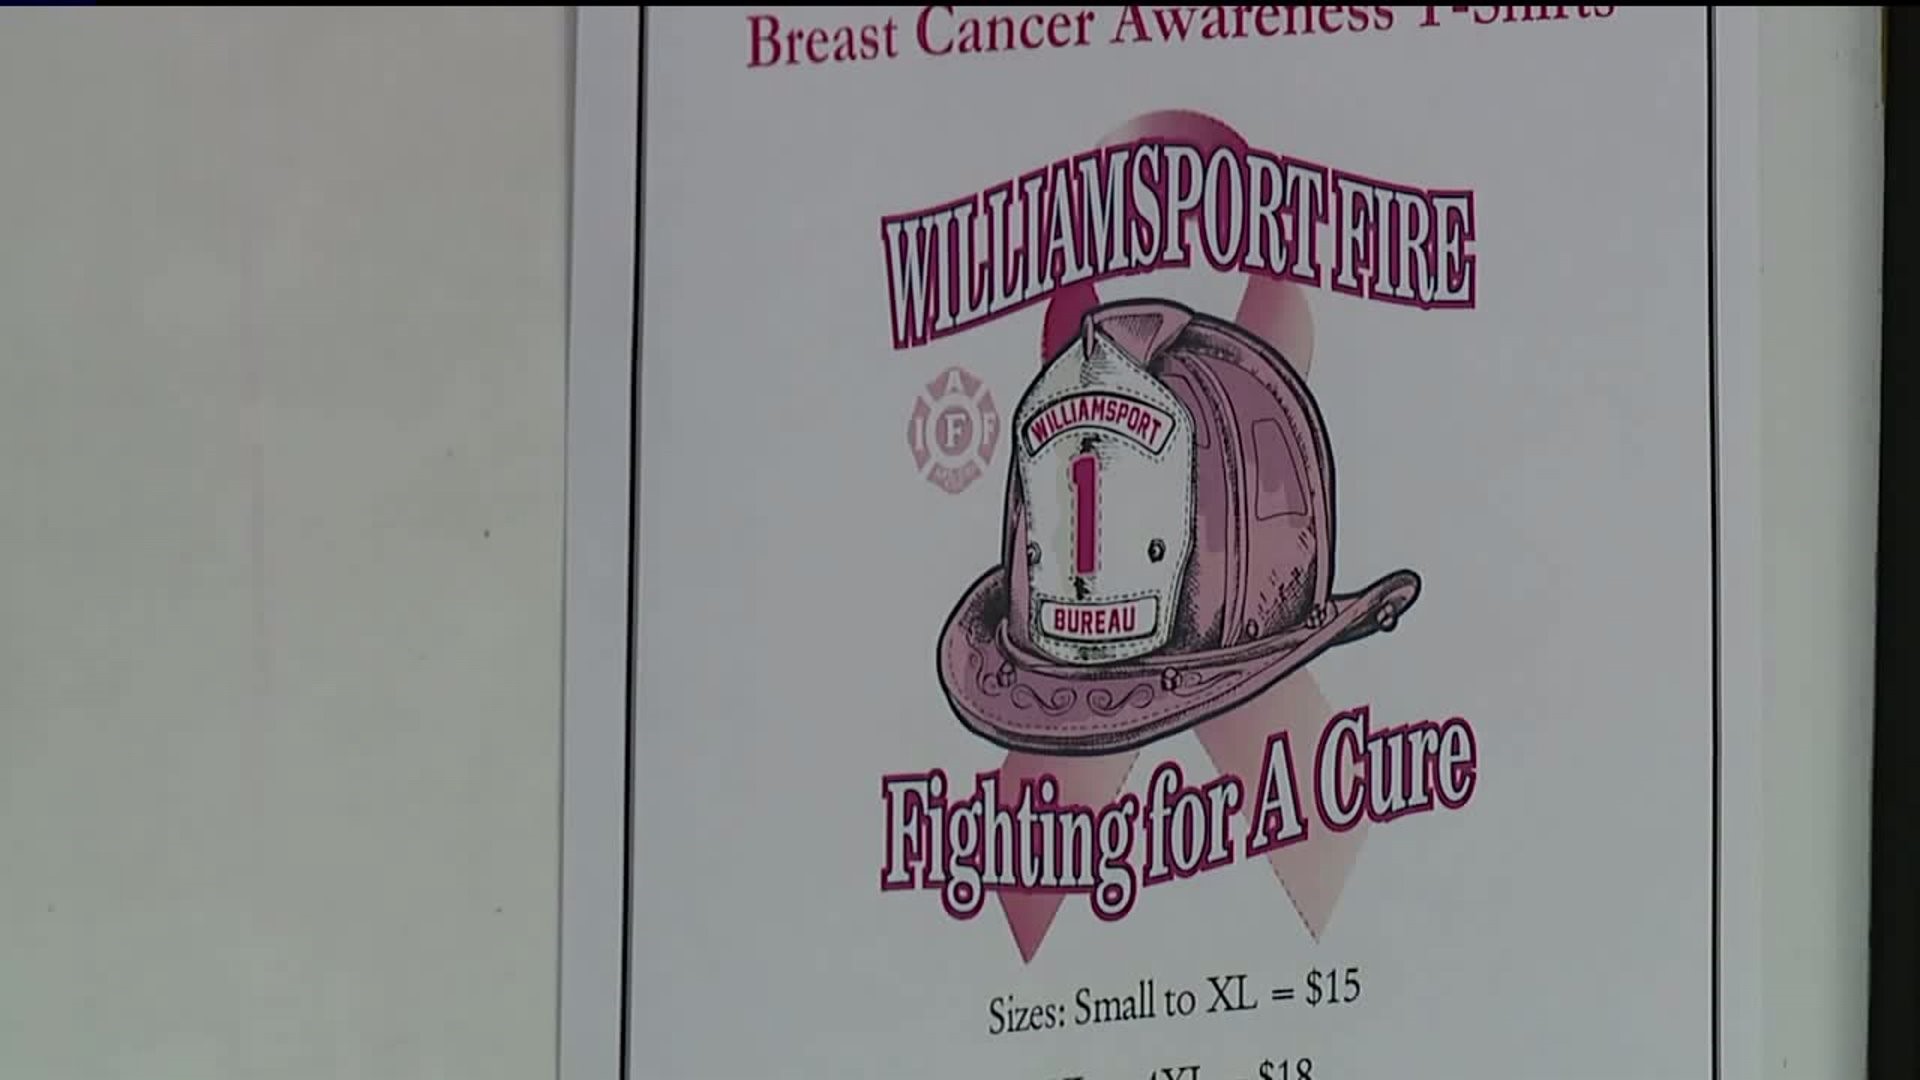 Firefighters in Williamsport Stepping Up to Fight Breast Cancer